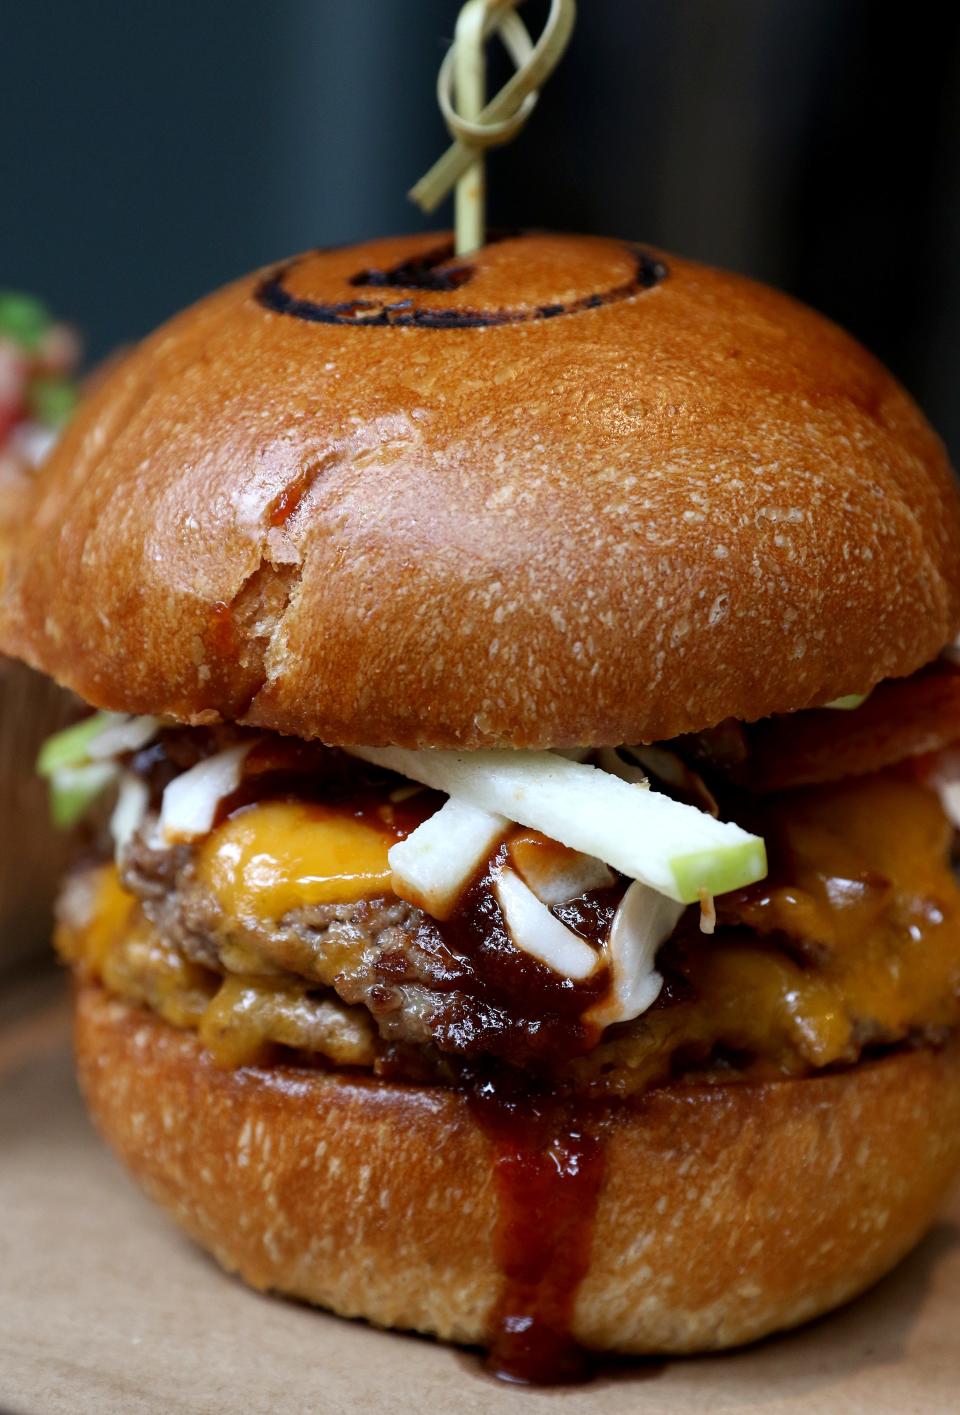 The whisky bacon burger with whisky barbecue sauce and apple slaw by Nation Kitchen + Bar.